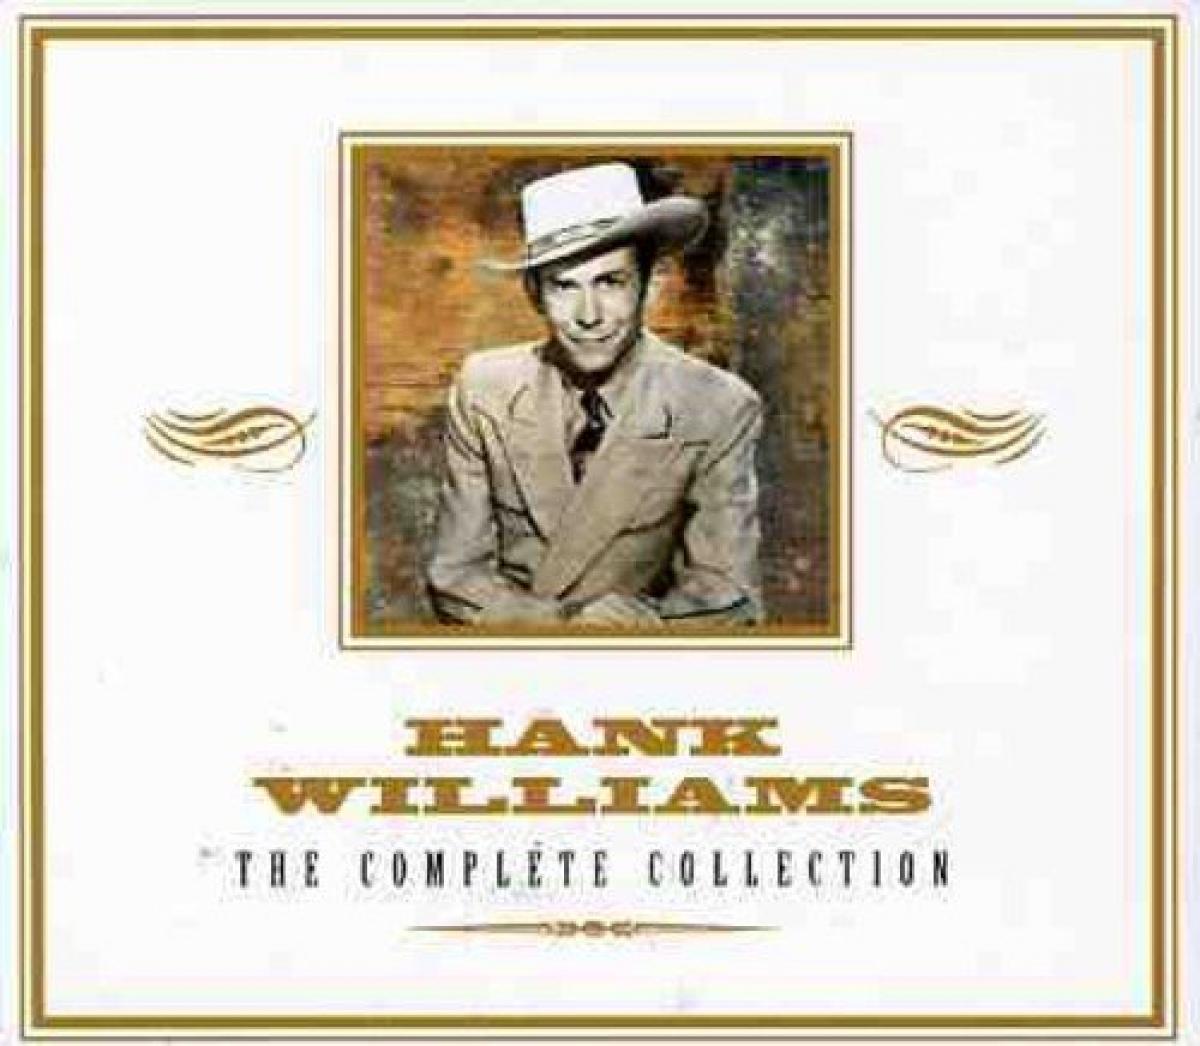 The Complete Collection of Hank Williams